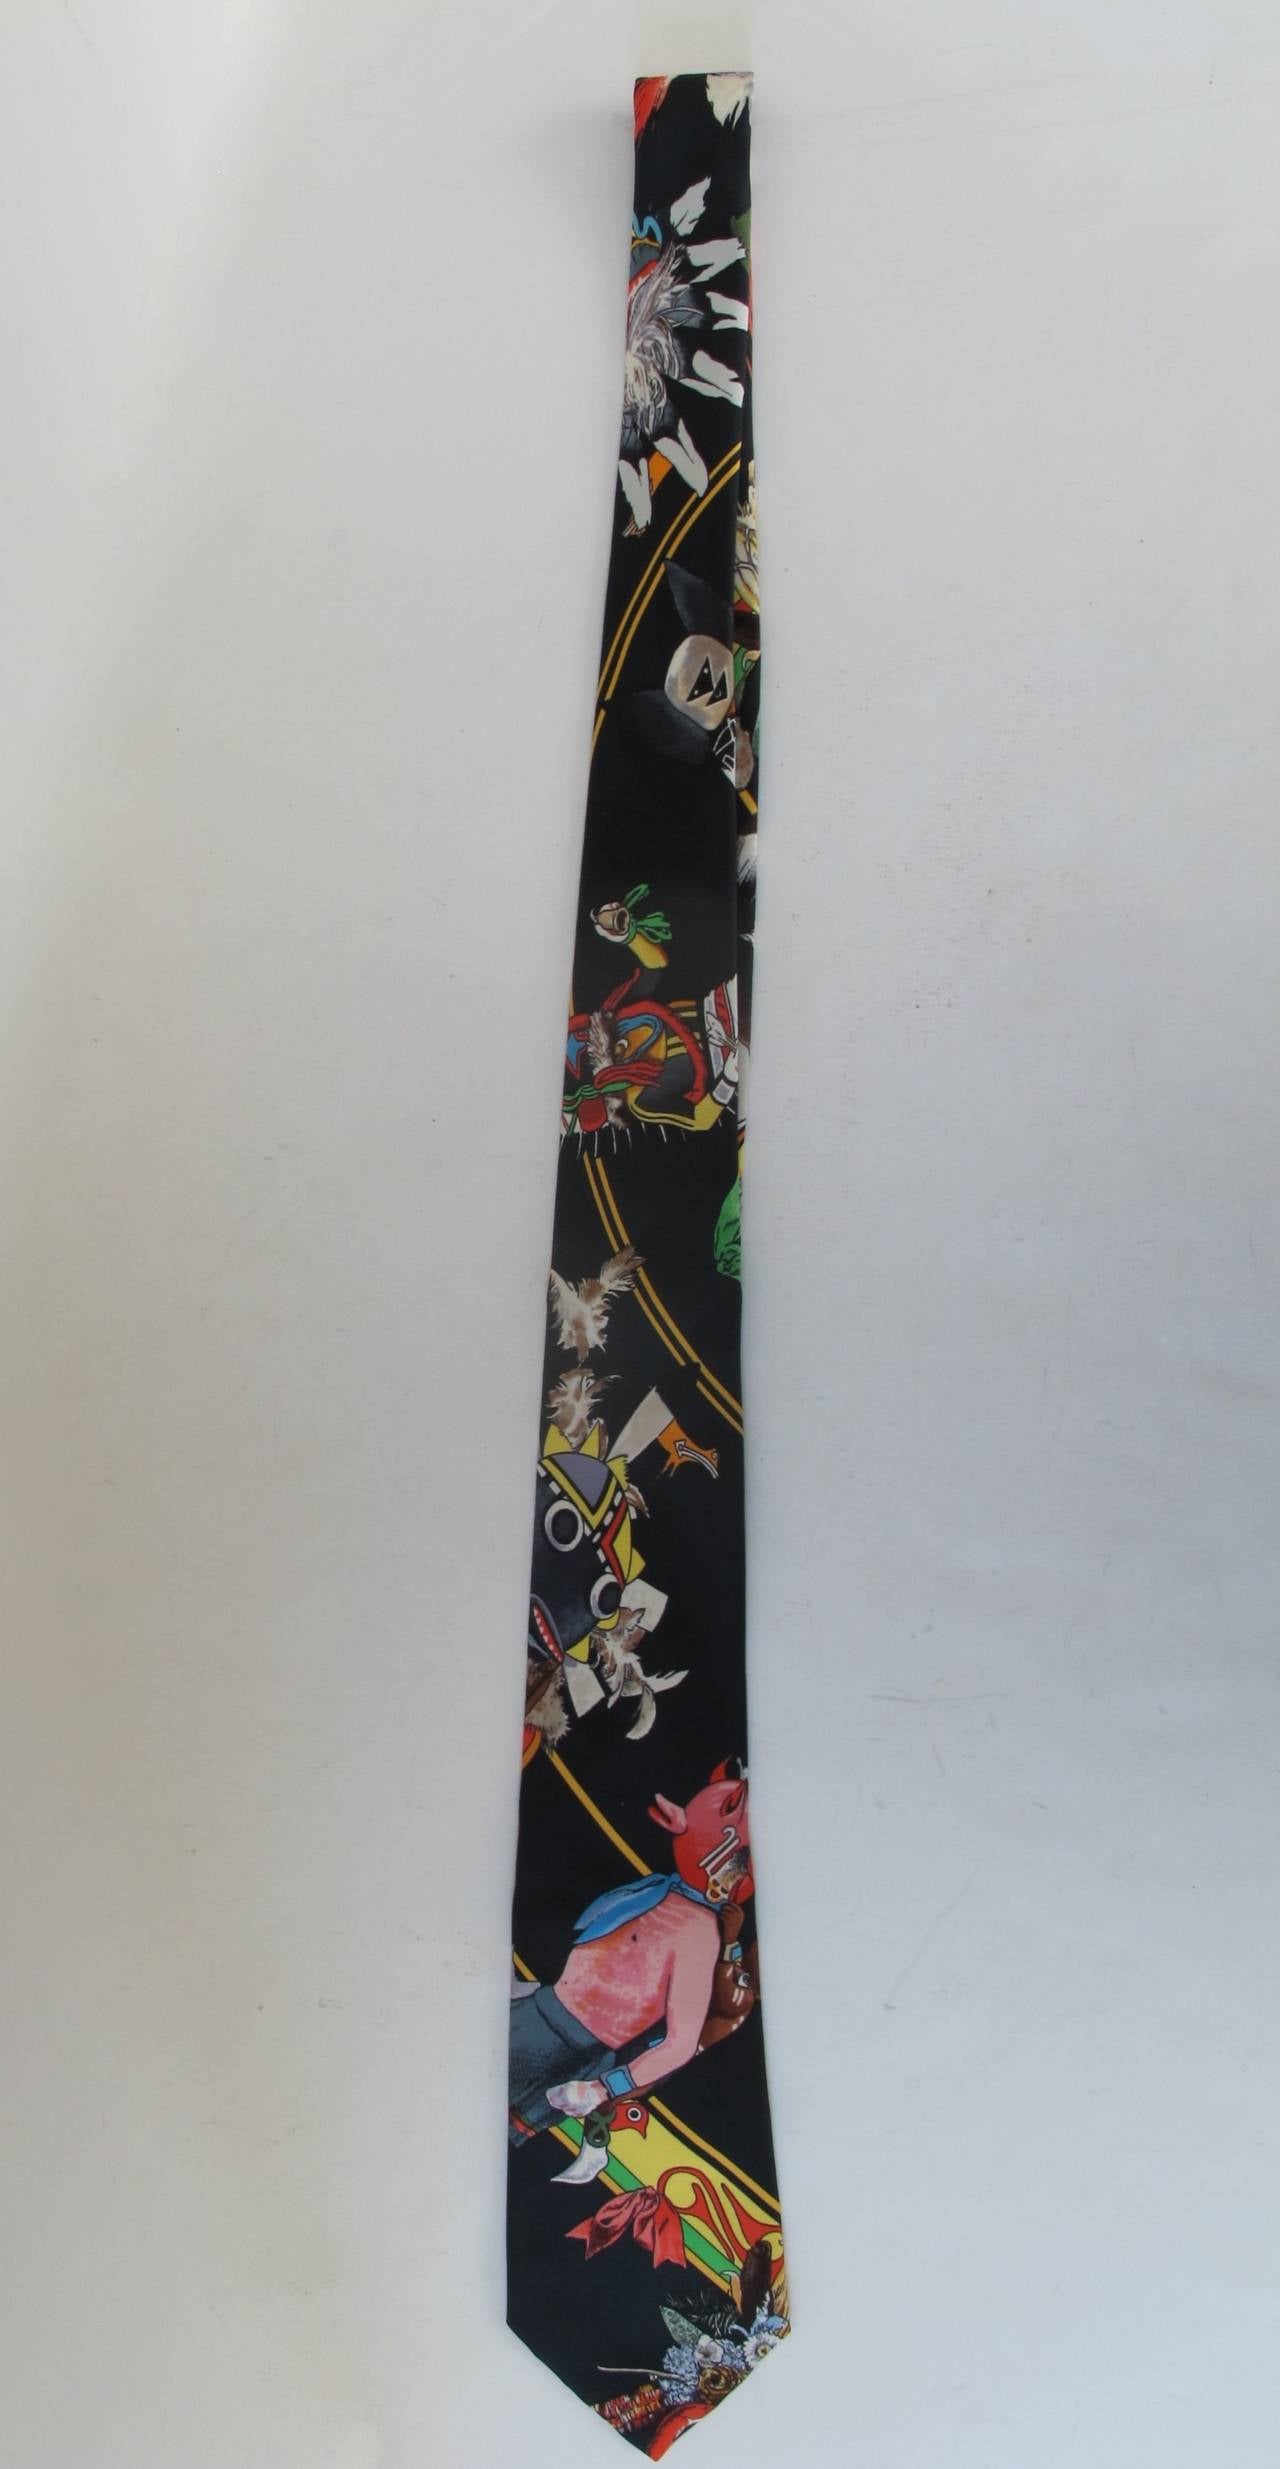 Rare Hermes Southwest Native American Kachina Dolls Theme Tie with black background. The tie is sought after by collectors.